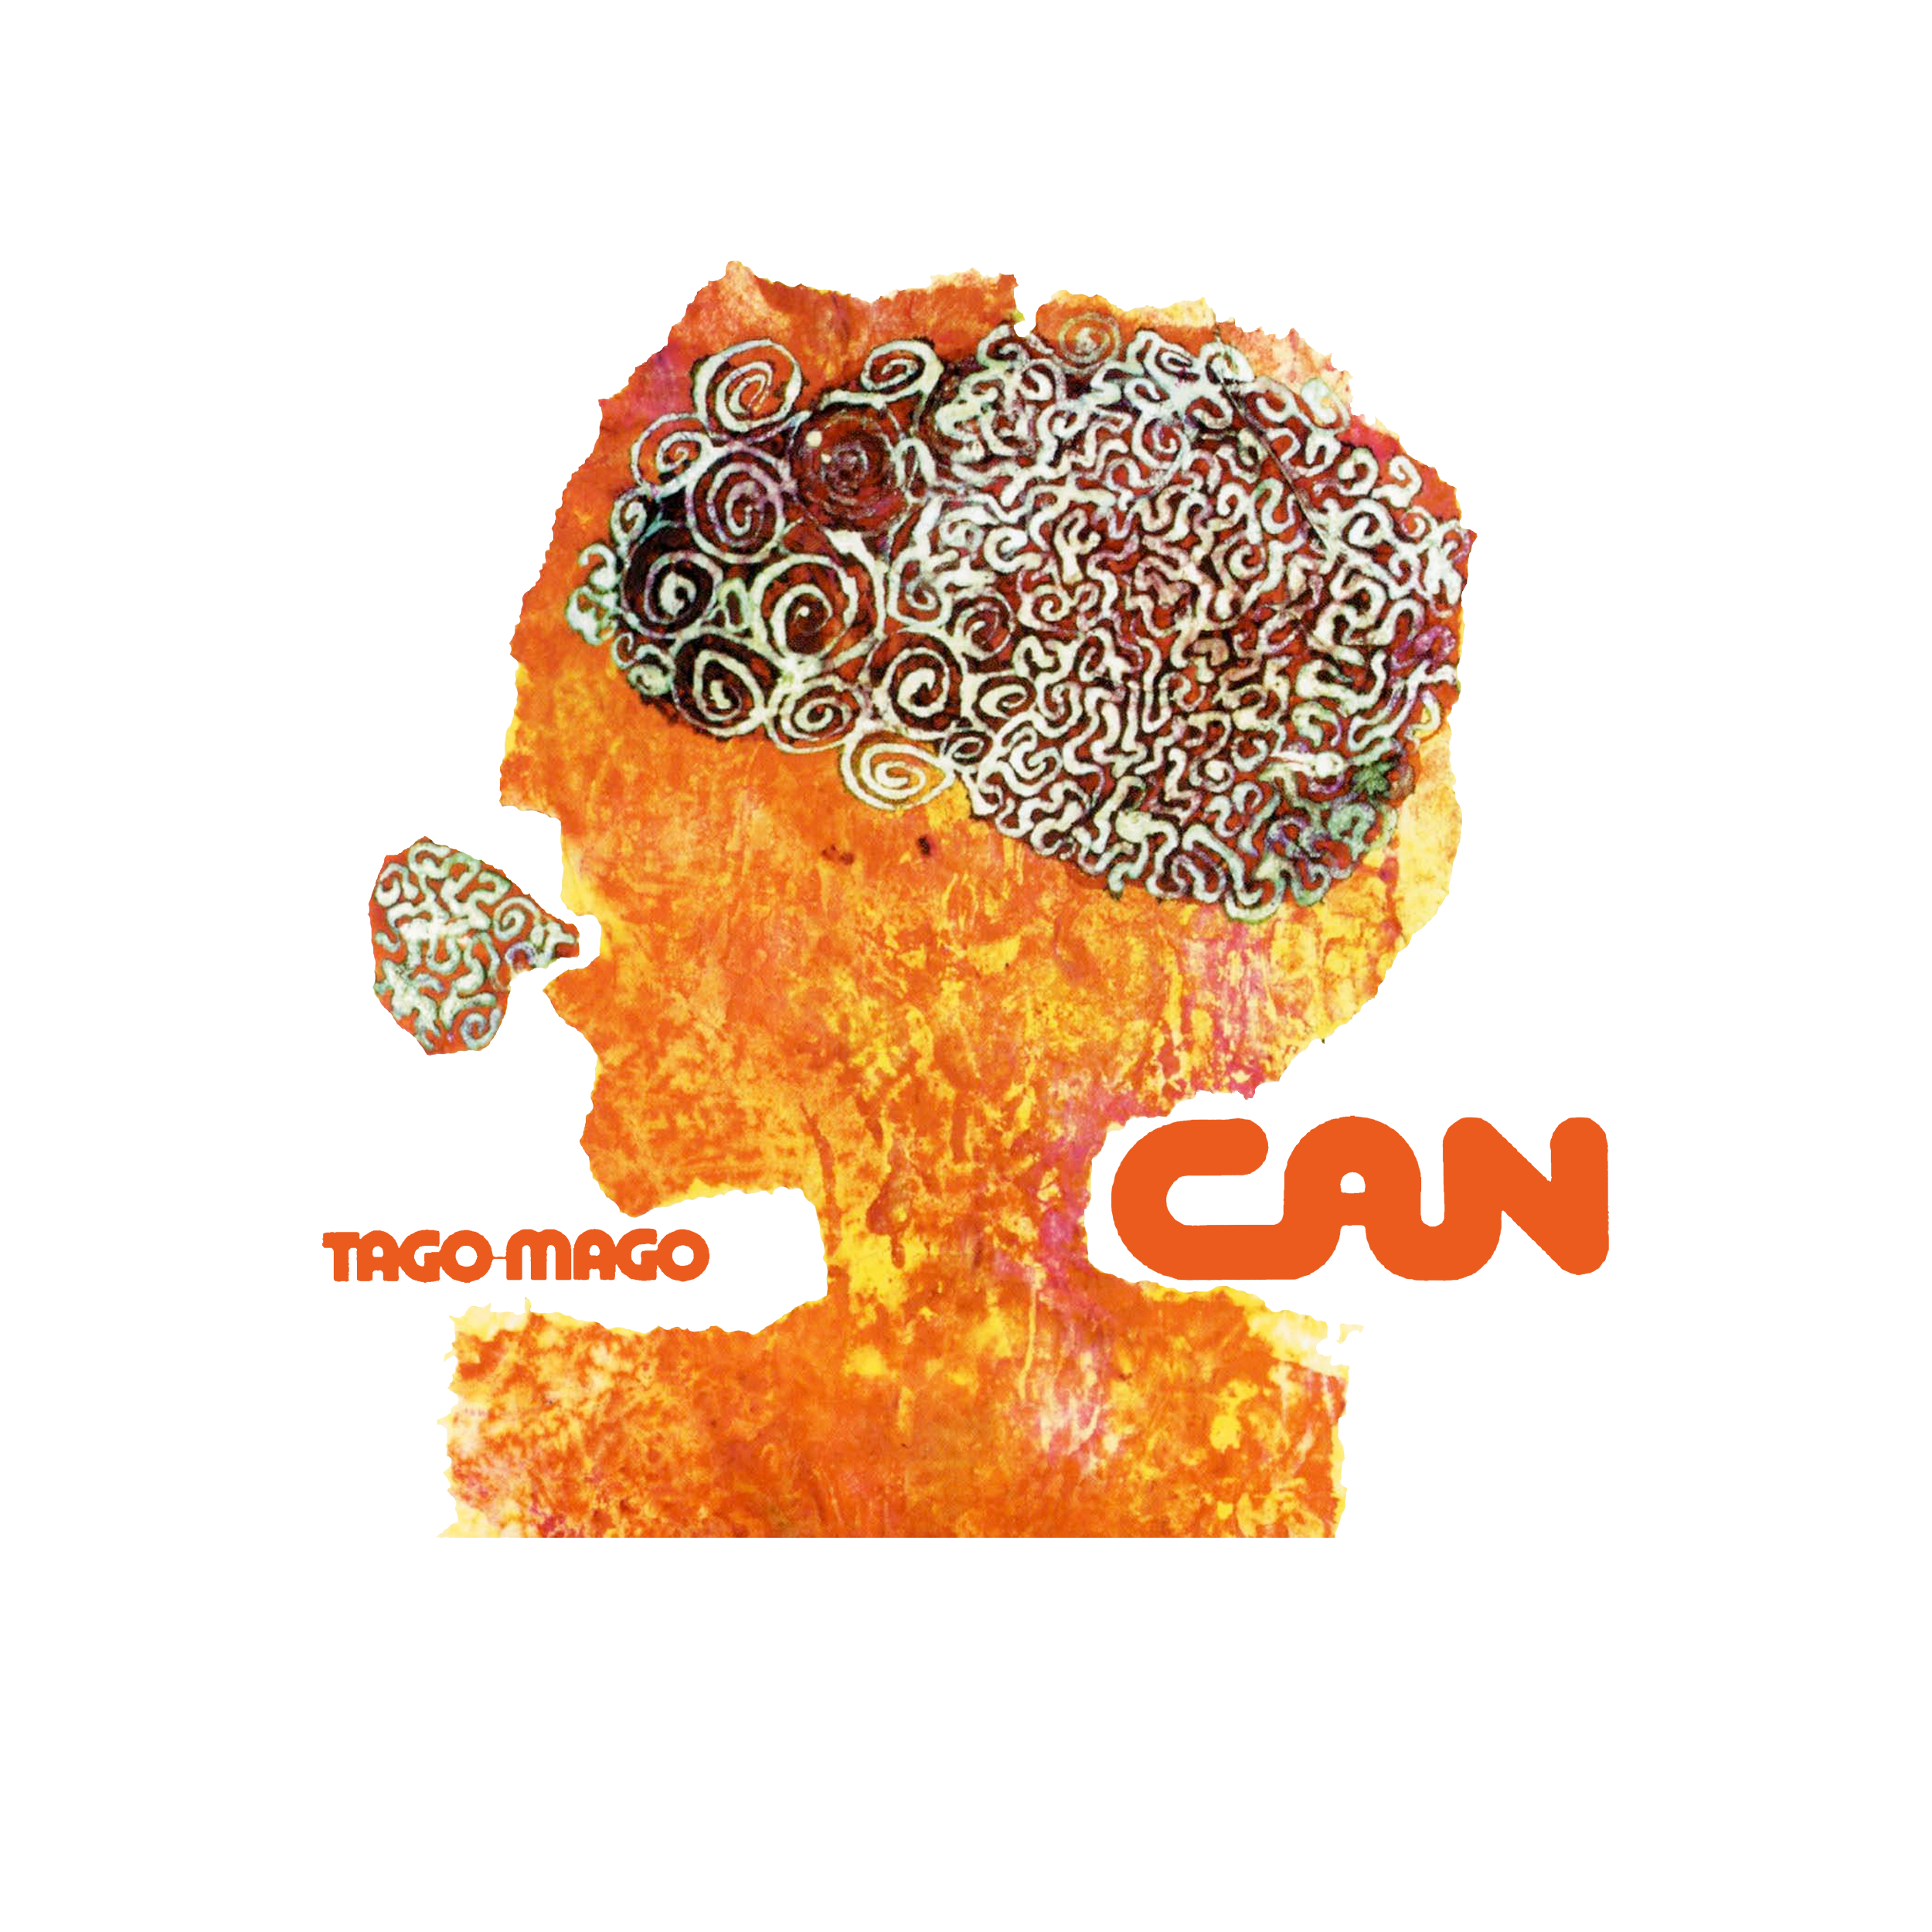 Can Tago Mago Classic Tee